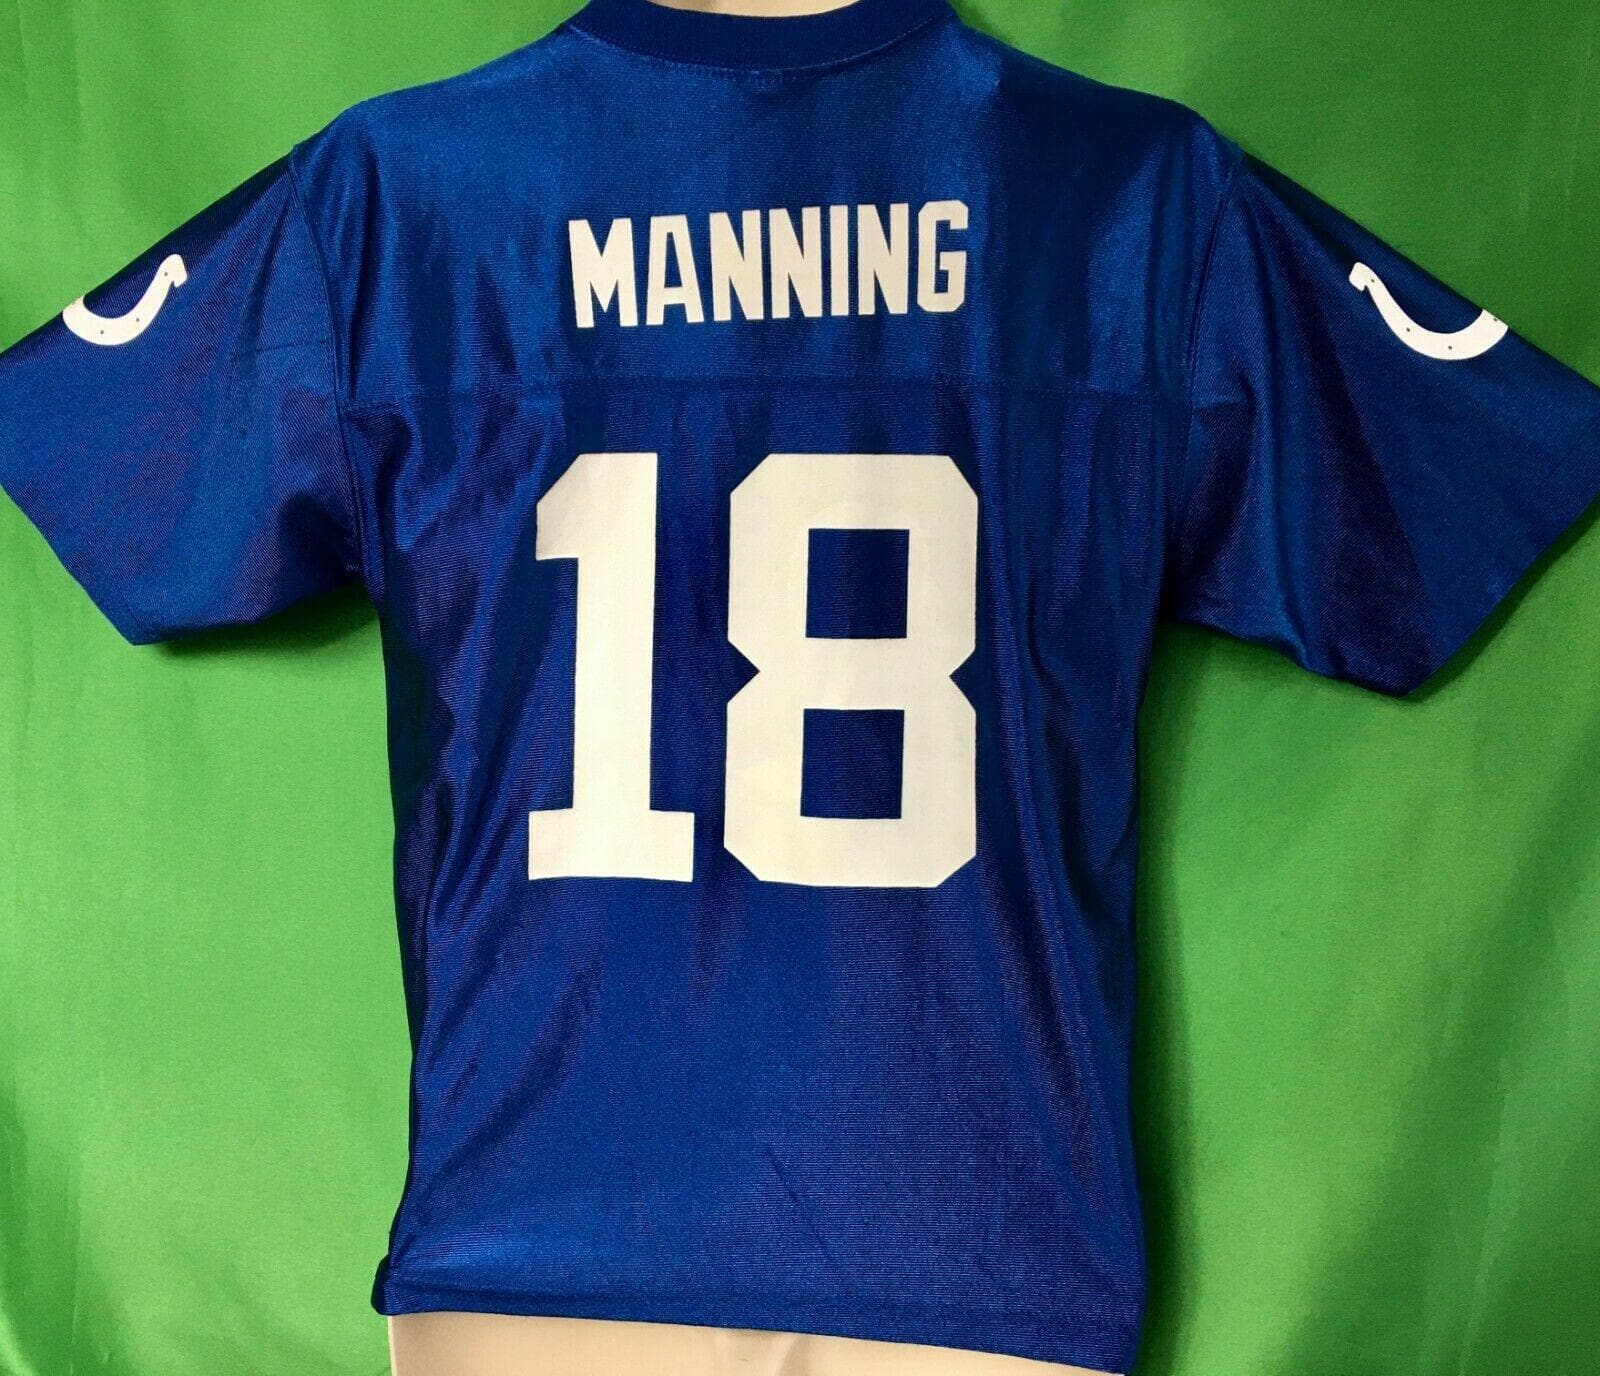 NFL Indianapolis Colts Peyton Manning #18 Jersey Youth Large 14-16